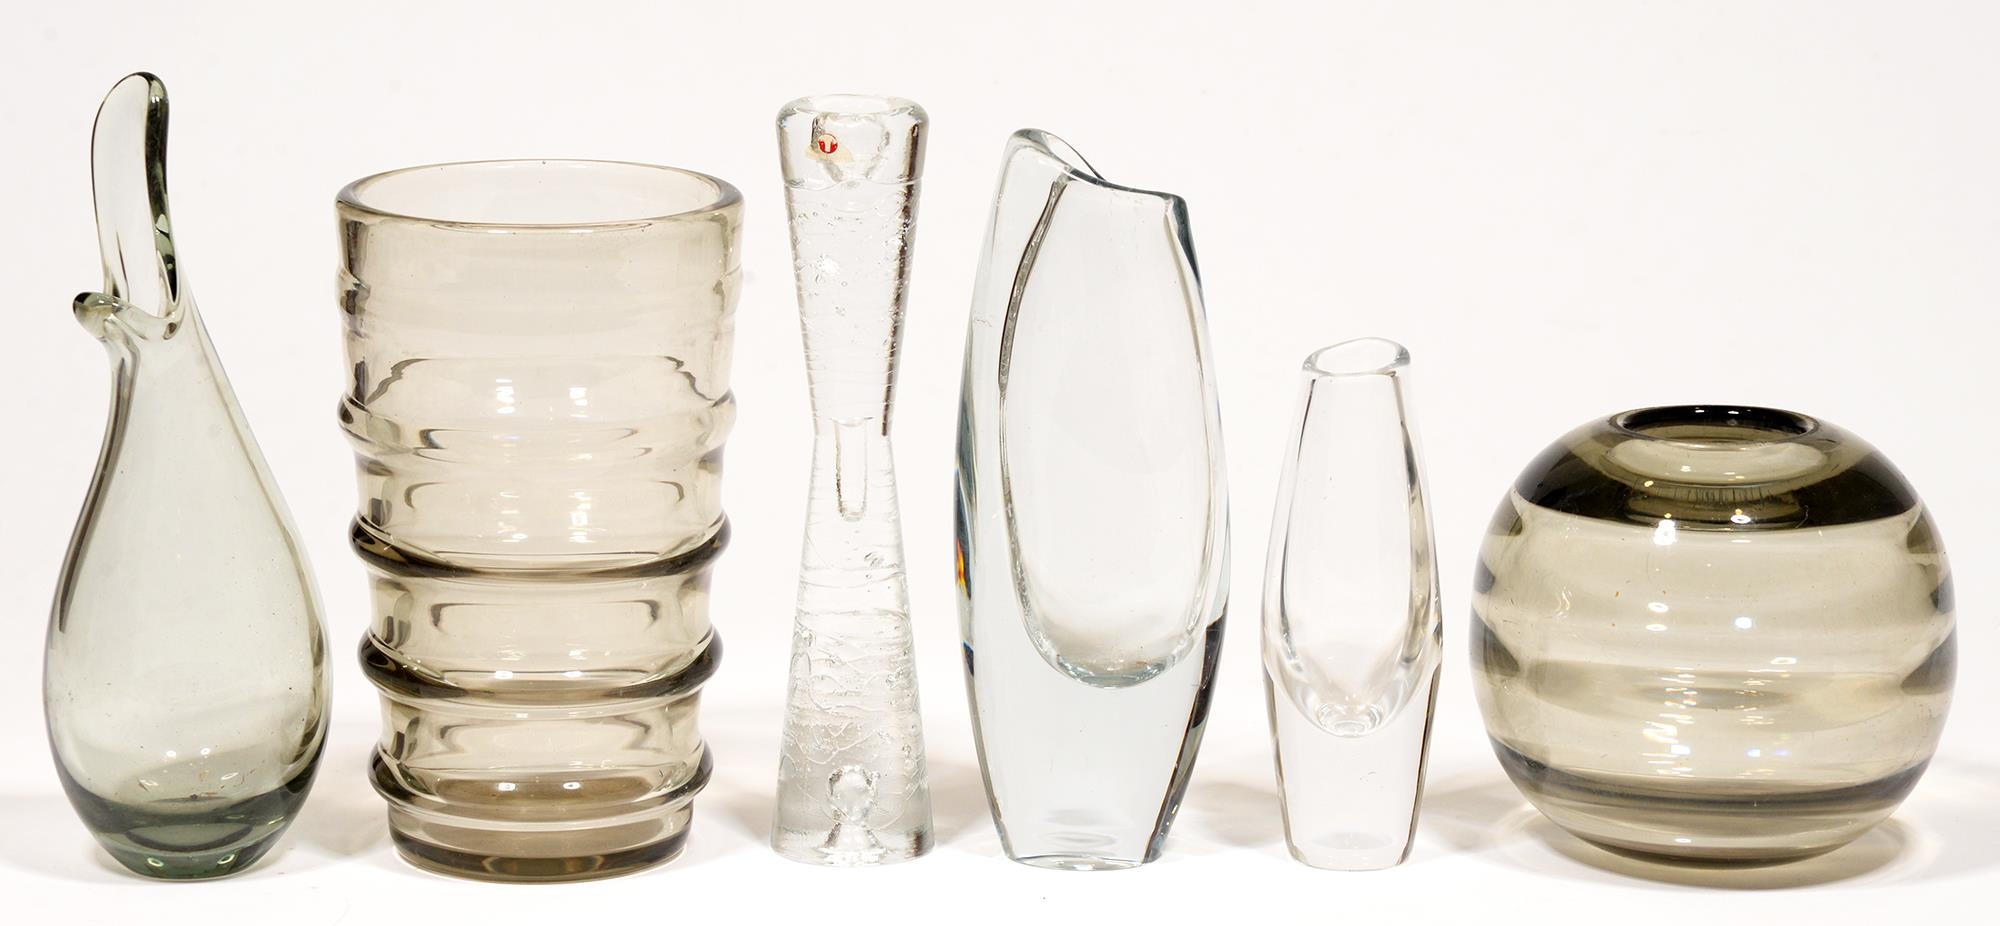 Six pieces of mid-century glass, including a candlestick